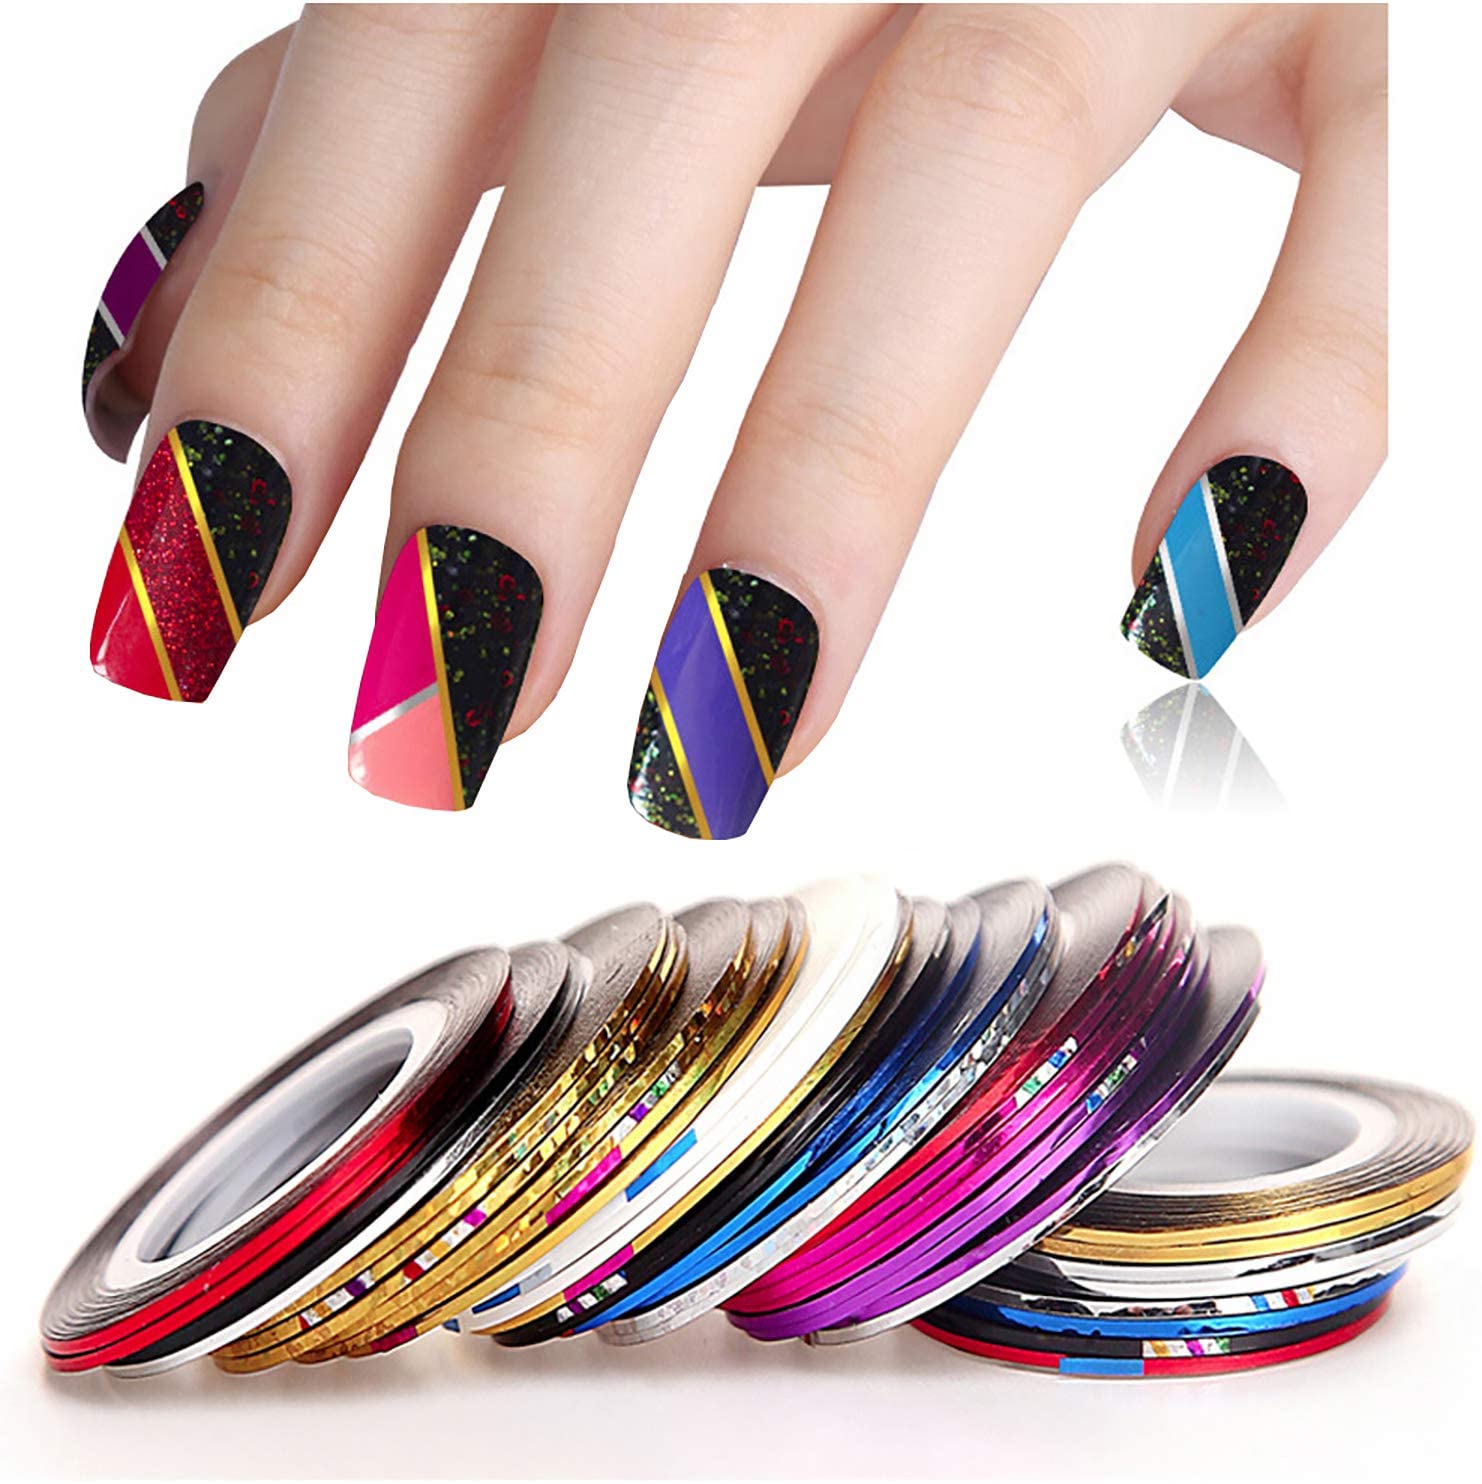 Nail Striping Tape Line Multicolor Mixed Rolls Striping Tape Line DIY Nail  Tip Nail Art Decals Decoration Sticker per pc nailartsticker2 | Nail  Technician courses - Stayve BB Glow - Eyelash Extension -